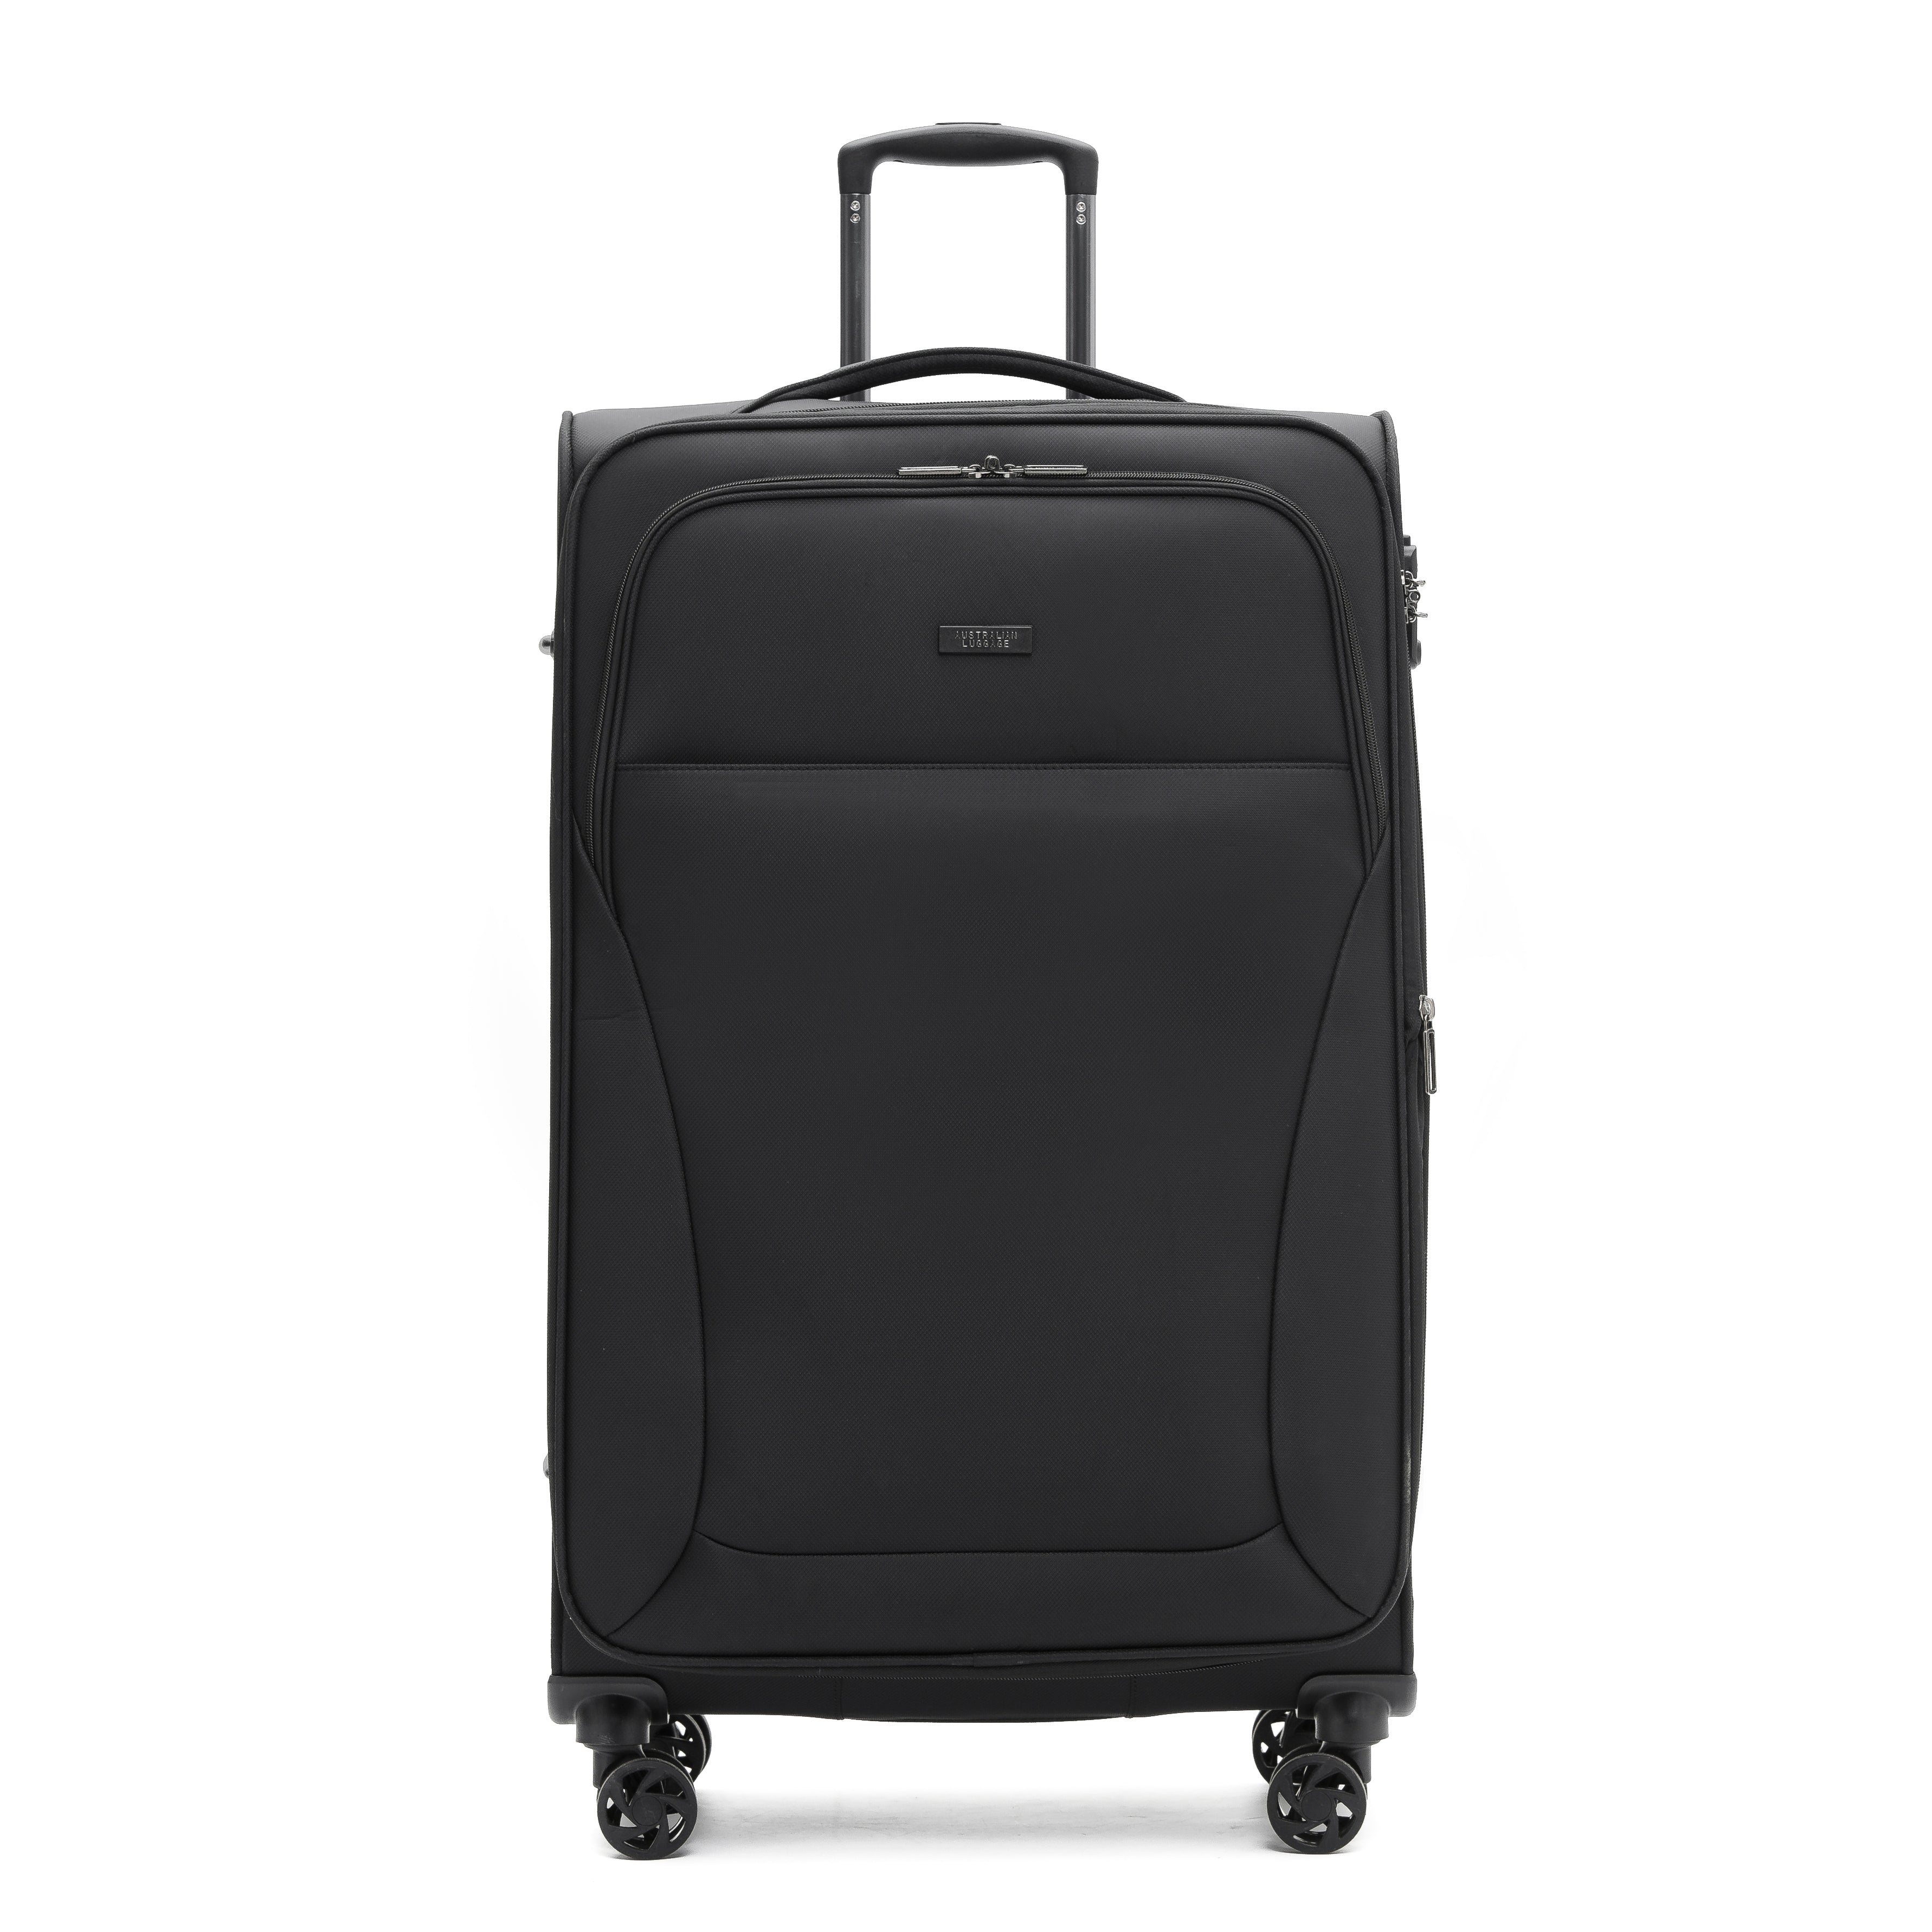 AUS LUGGAGE - WINGS Trolley Case 29in Large - BLACK-3